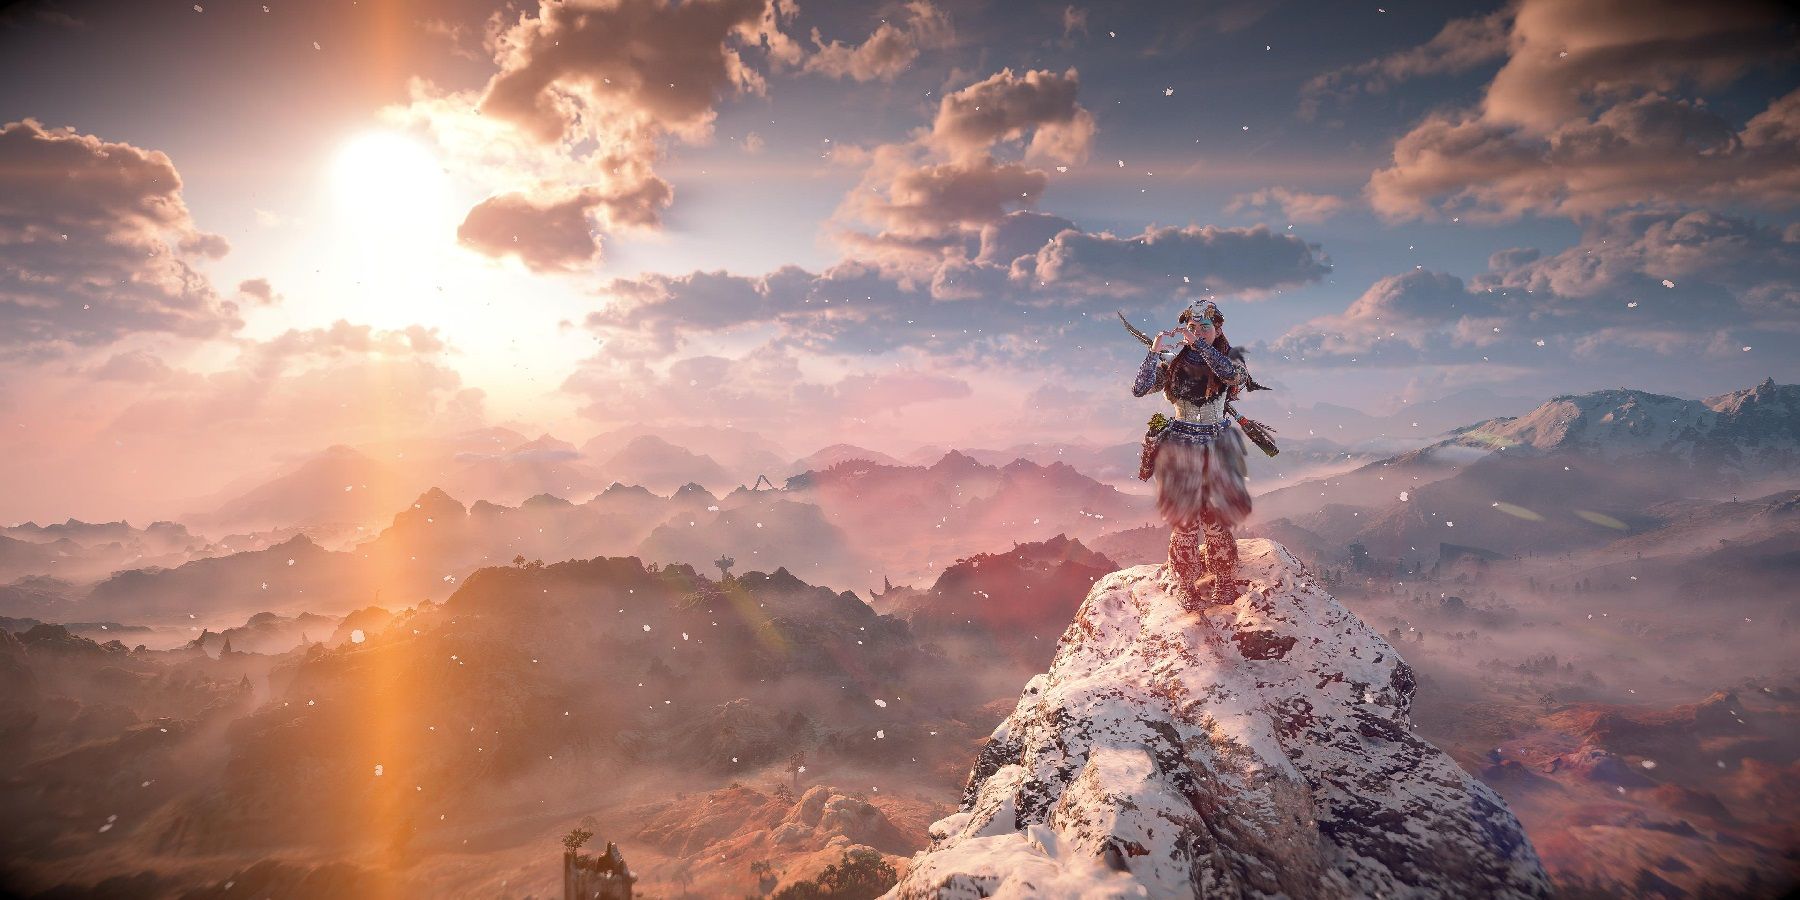 Horizon Forbidden West is coming to PC according to Sony's leaked